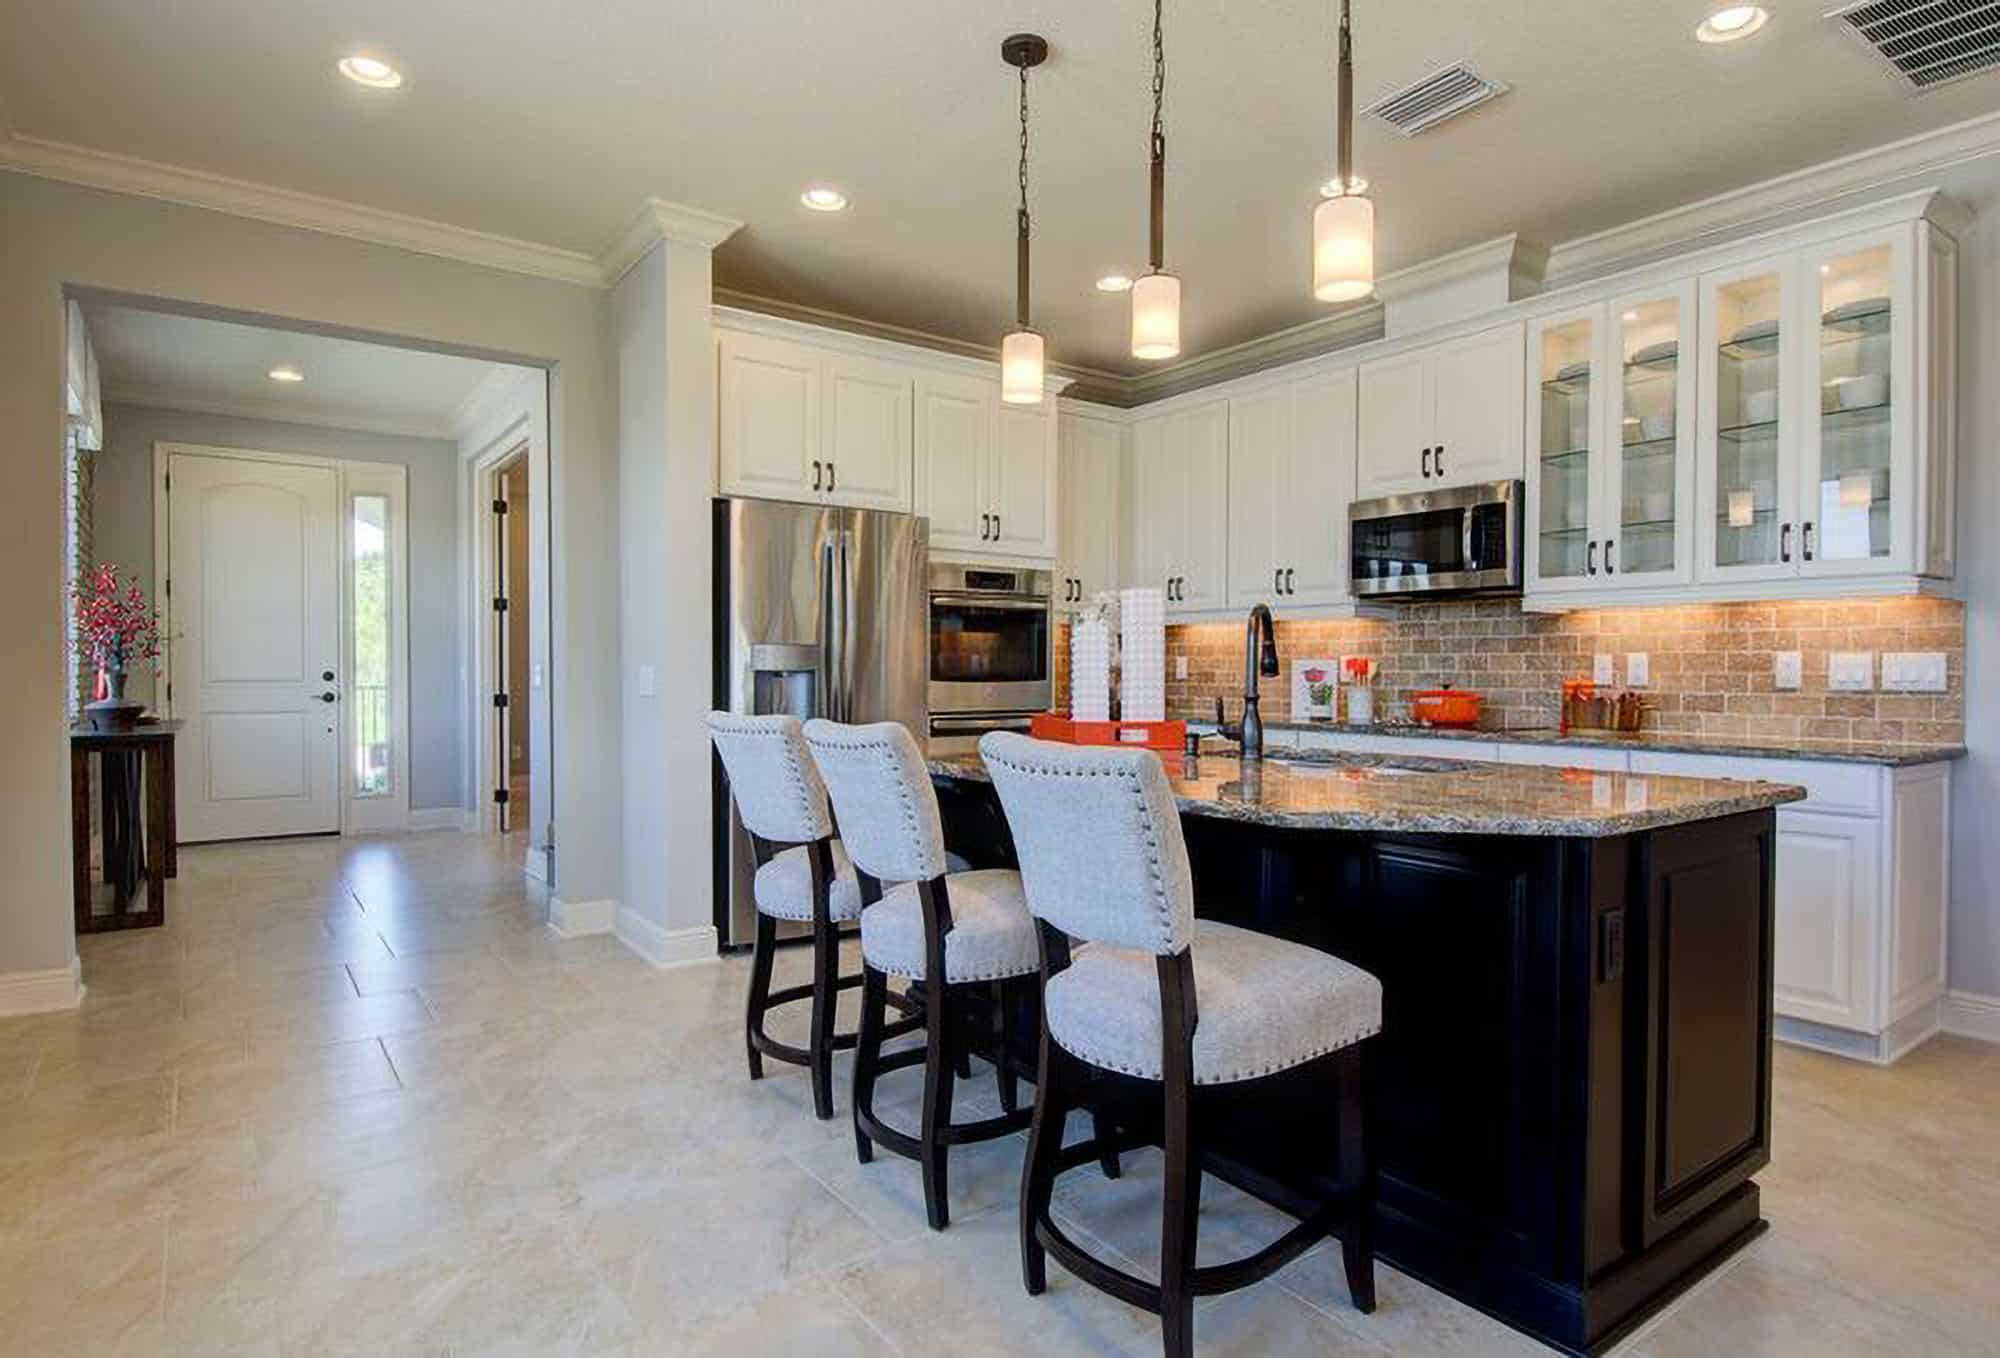 Kitchen at Braden single-family home by M/I Homes